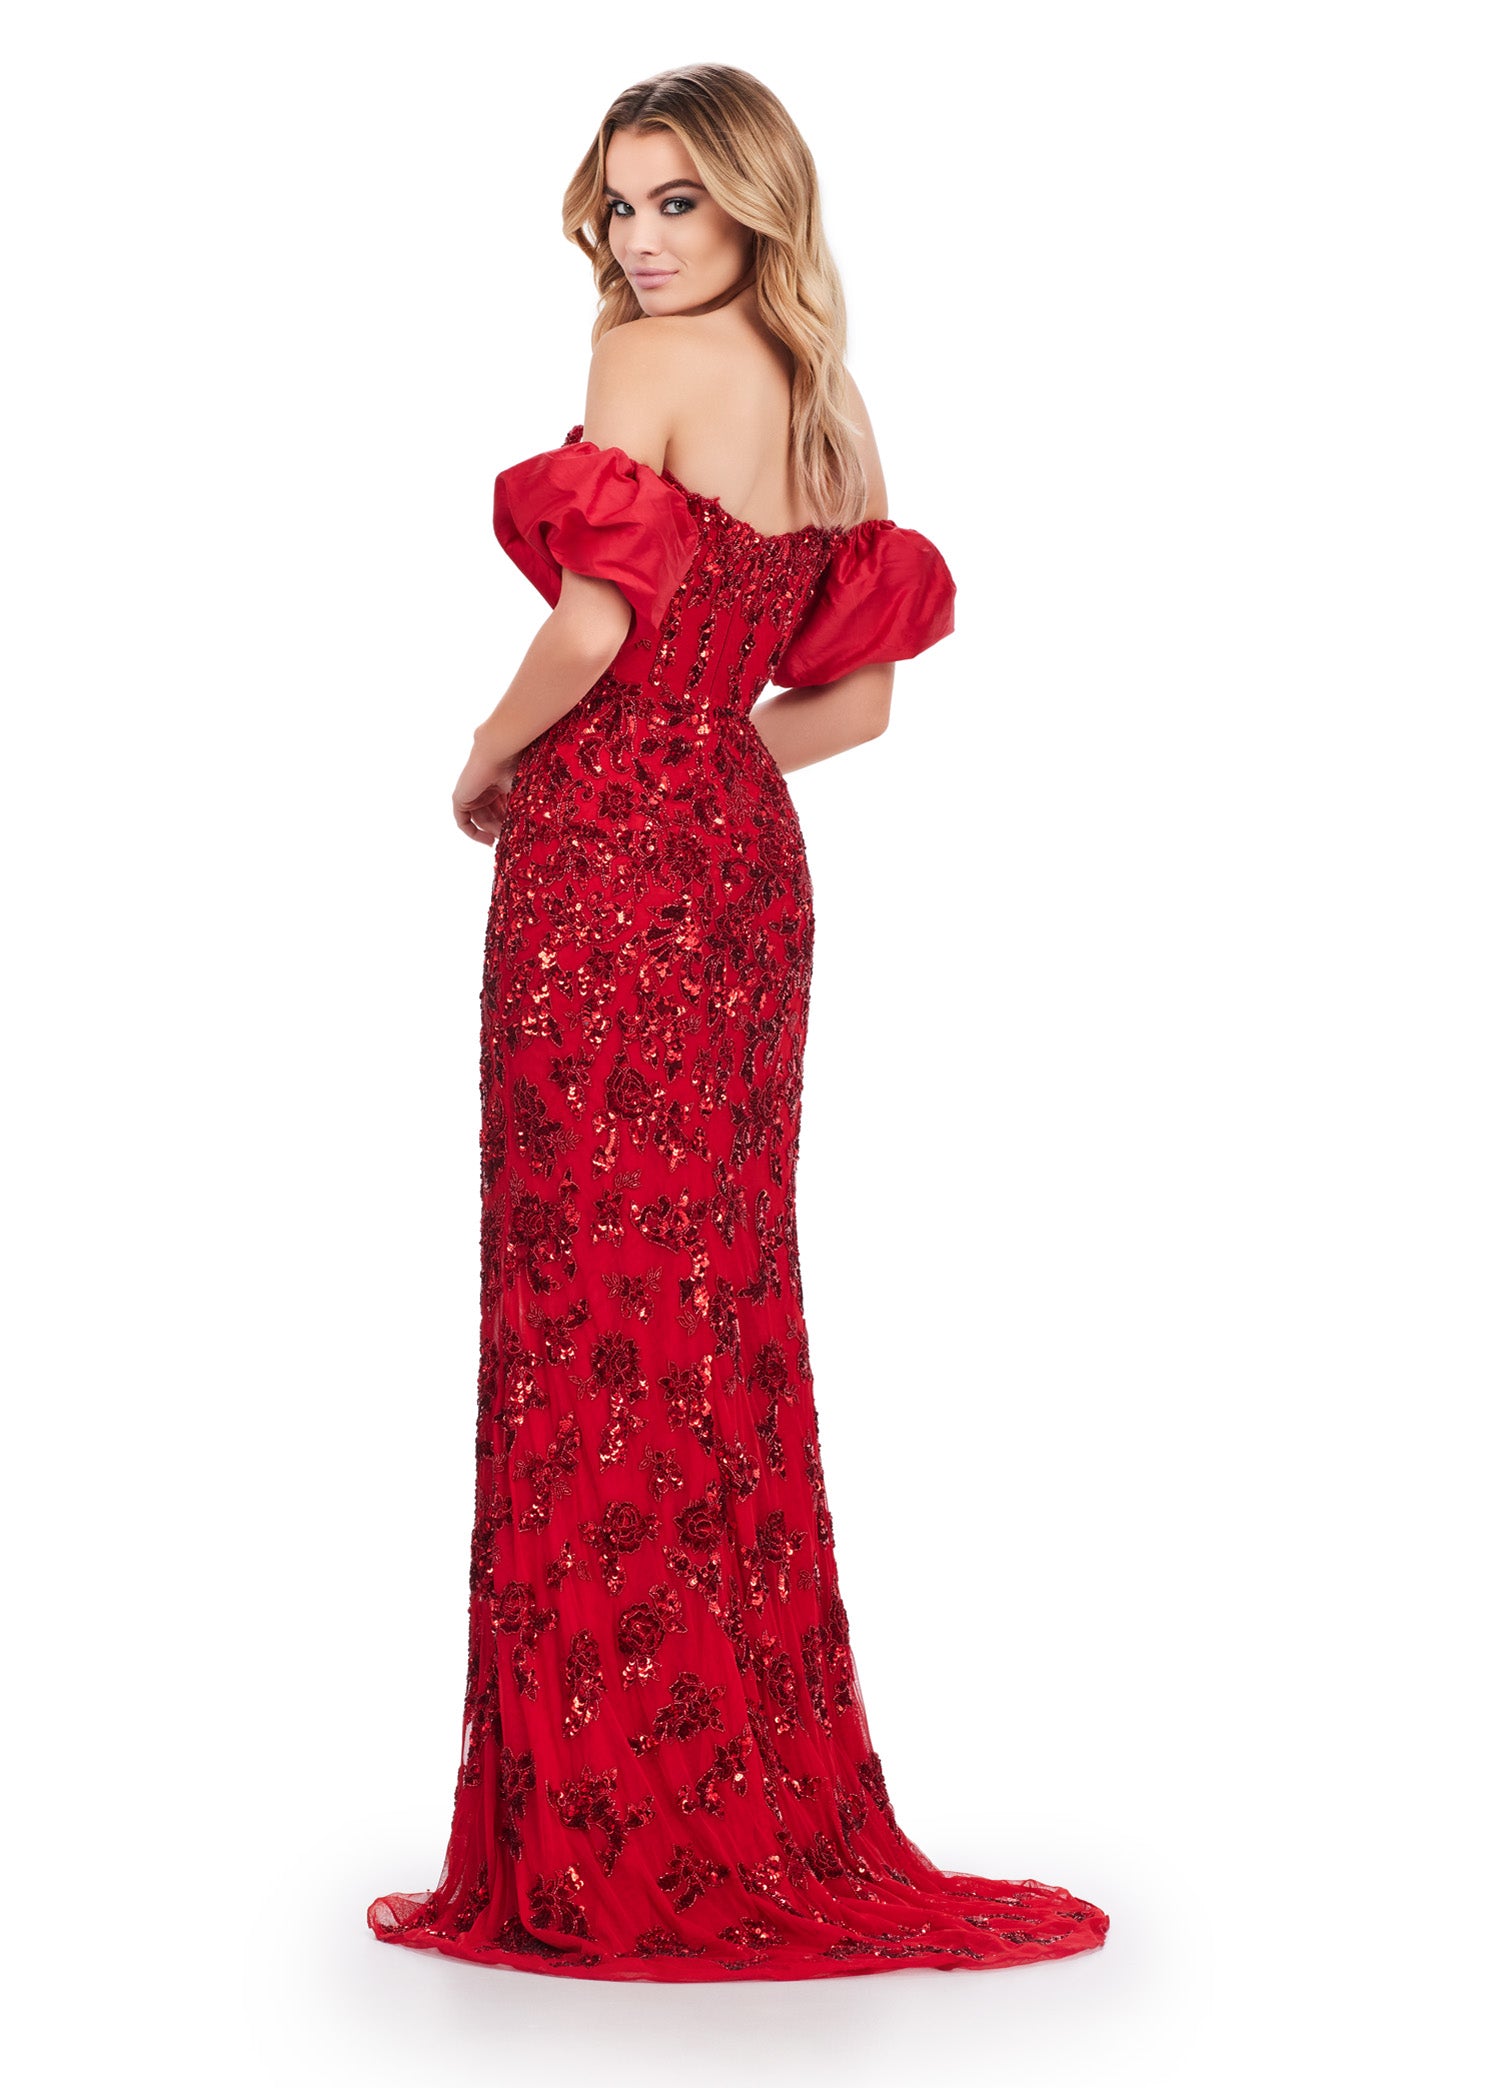 Slip into elegance with the Ashley Lauren 11585 Long Prom Dress. This stunning gown features a beaded strapless bodice, detachable taffeta puff sleeves, and a flowy taffeta skirt. Perfect for any formal event or pageant, this dress is sure to make you stand out with its unique design and impeccable craftsmanship. Look and feel like a princess in the Ashley Lauren 11585. Fun and fabulous! This fully beaded strapless gown features an intricate lace pattern and detachable taffeta puff sleeves.